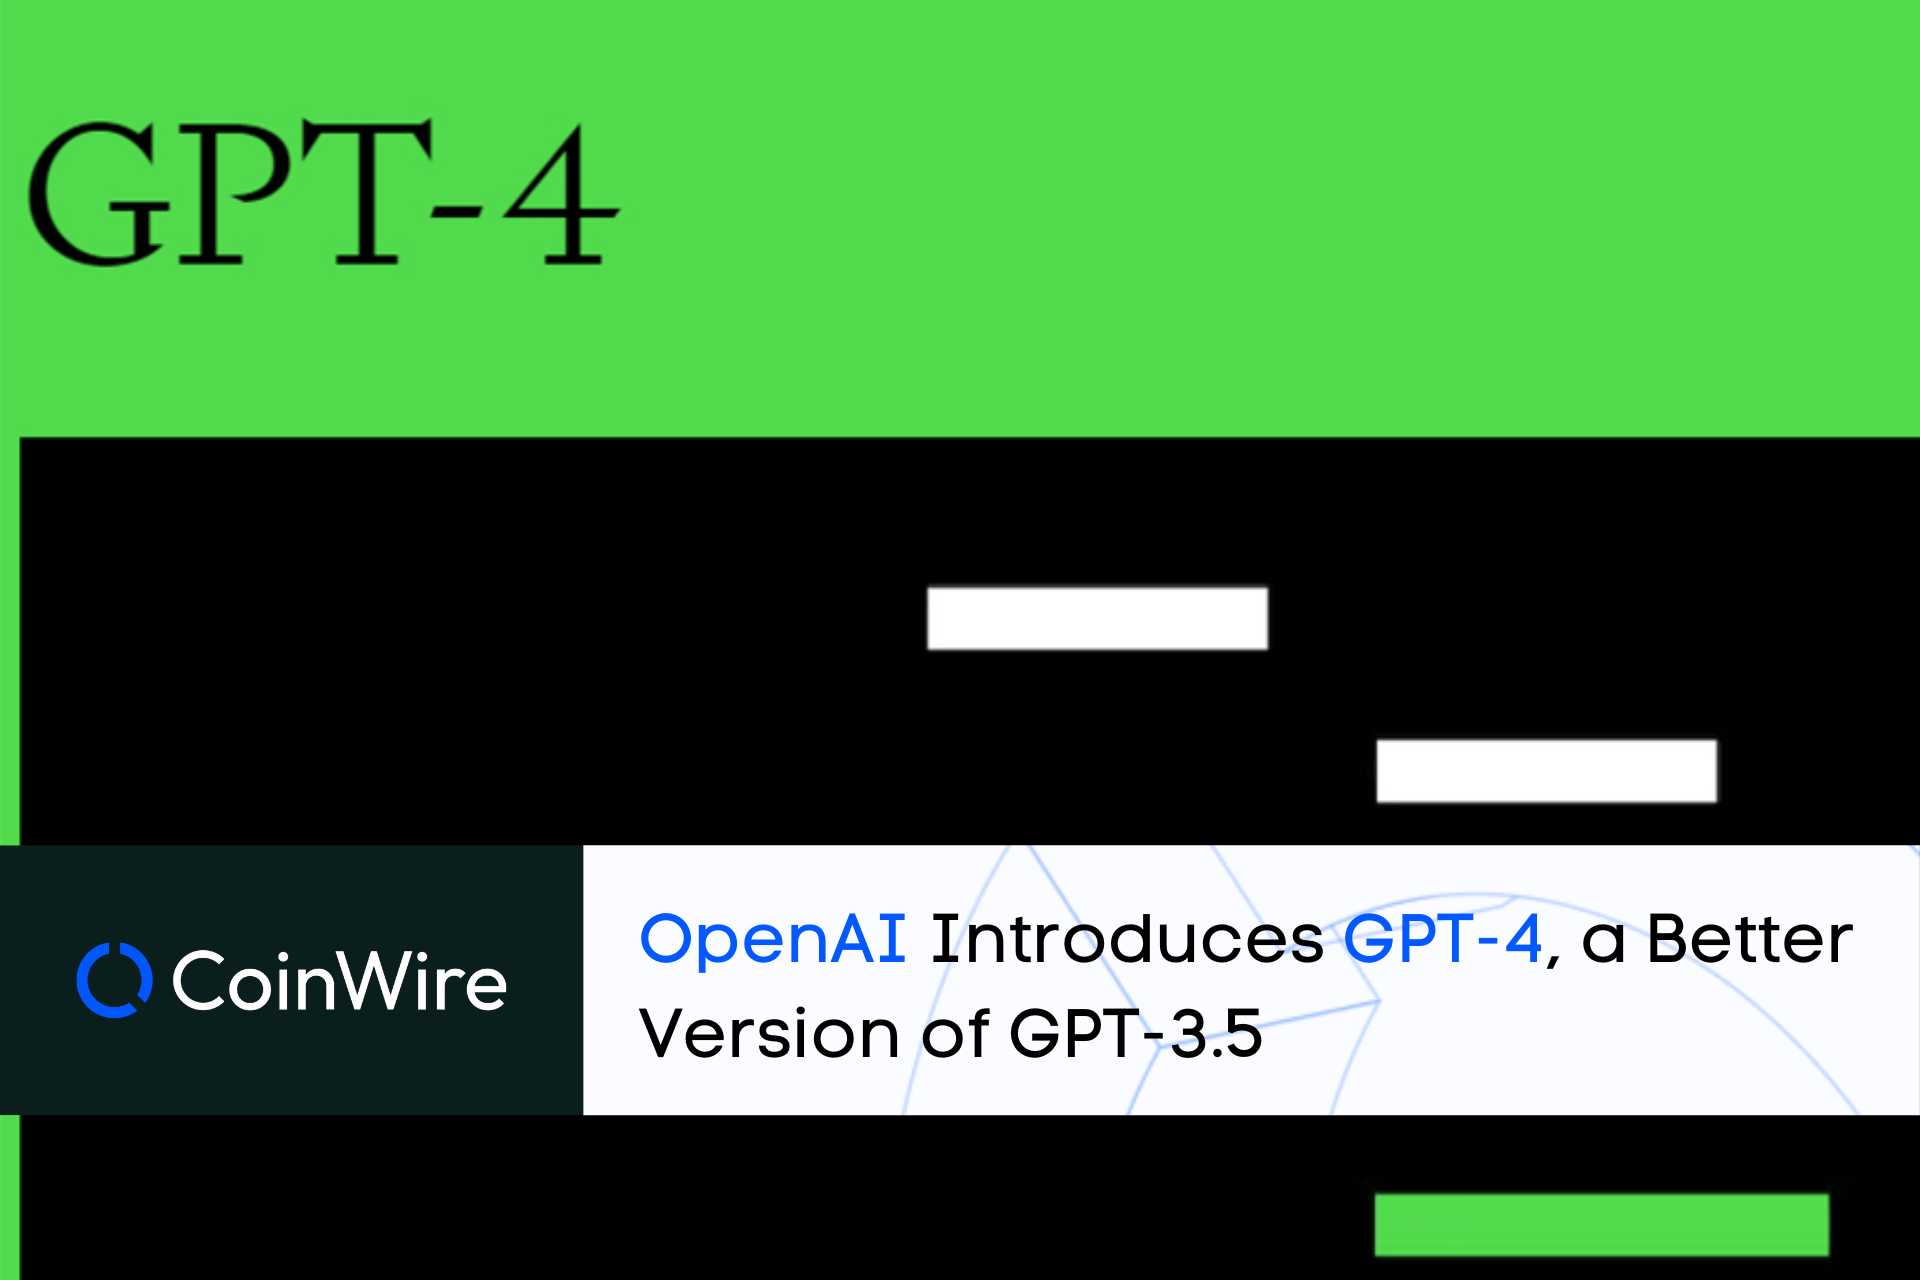 Openai Introduces Gpt-4, A Better Version Of Gpt-3.5